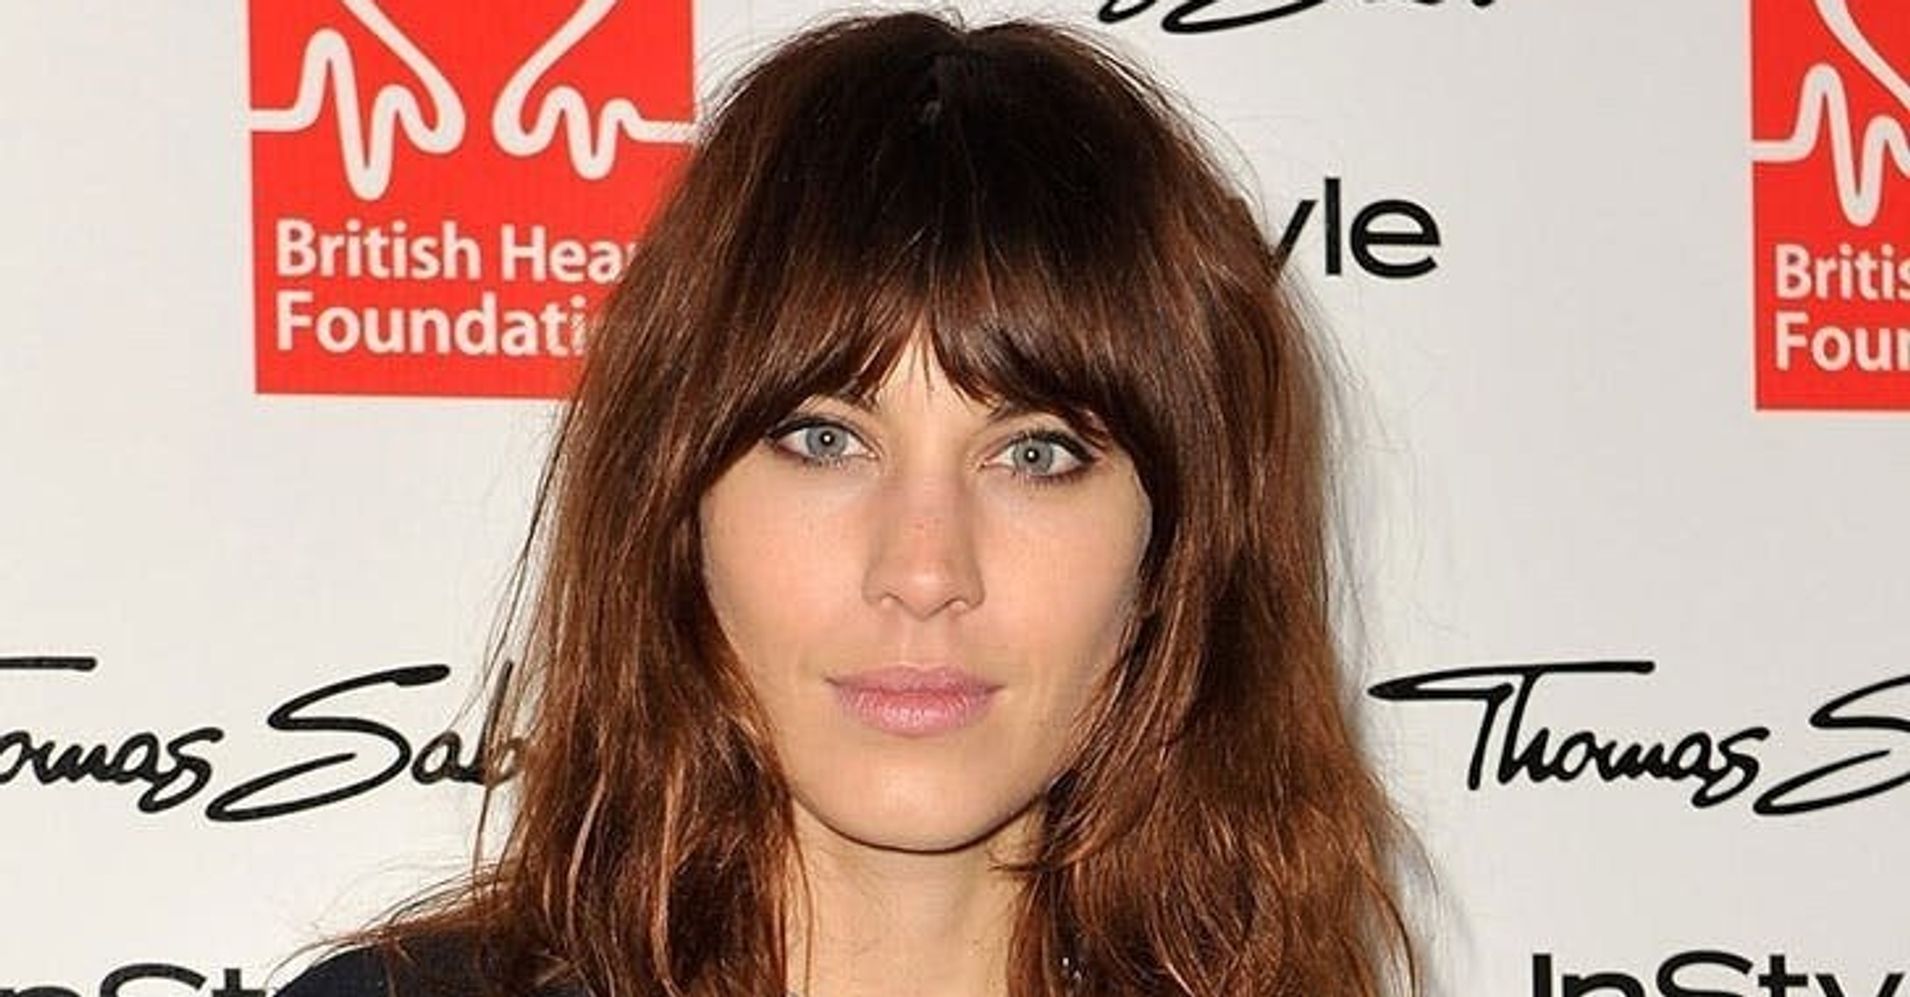 Shag Haircuts Are For Everyone, but Here Are 7 Celebs Rocking The Look ...